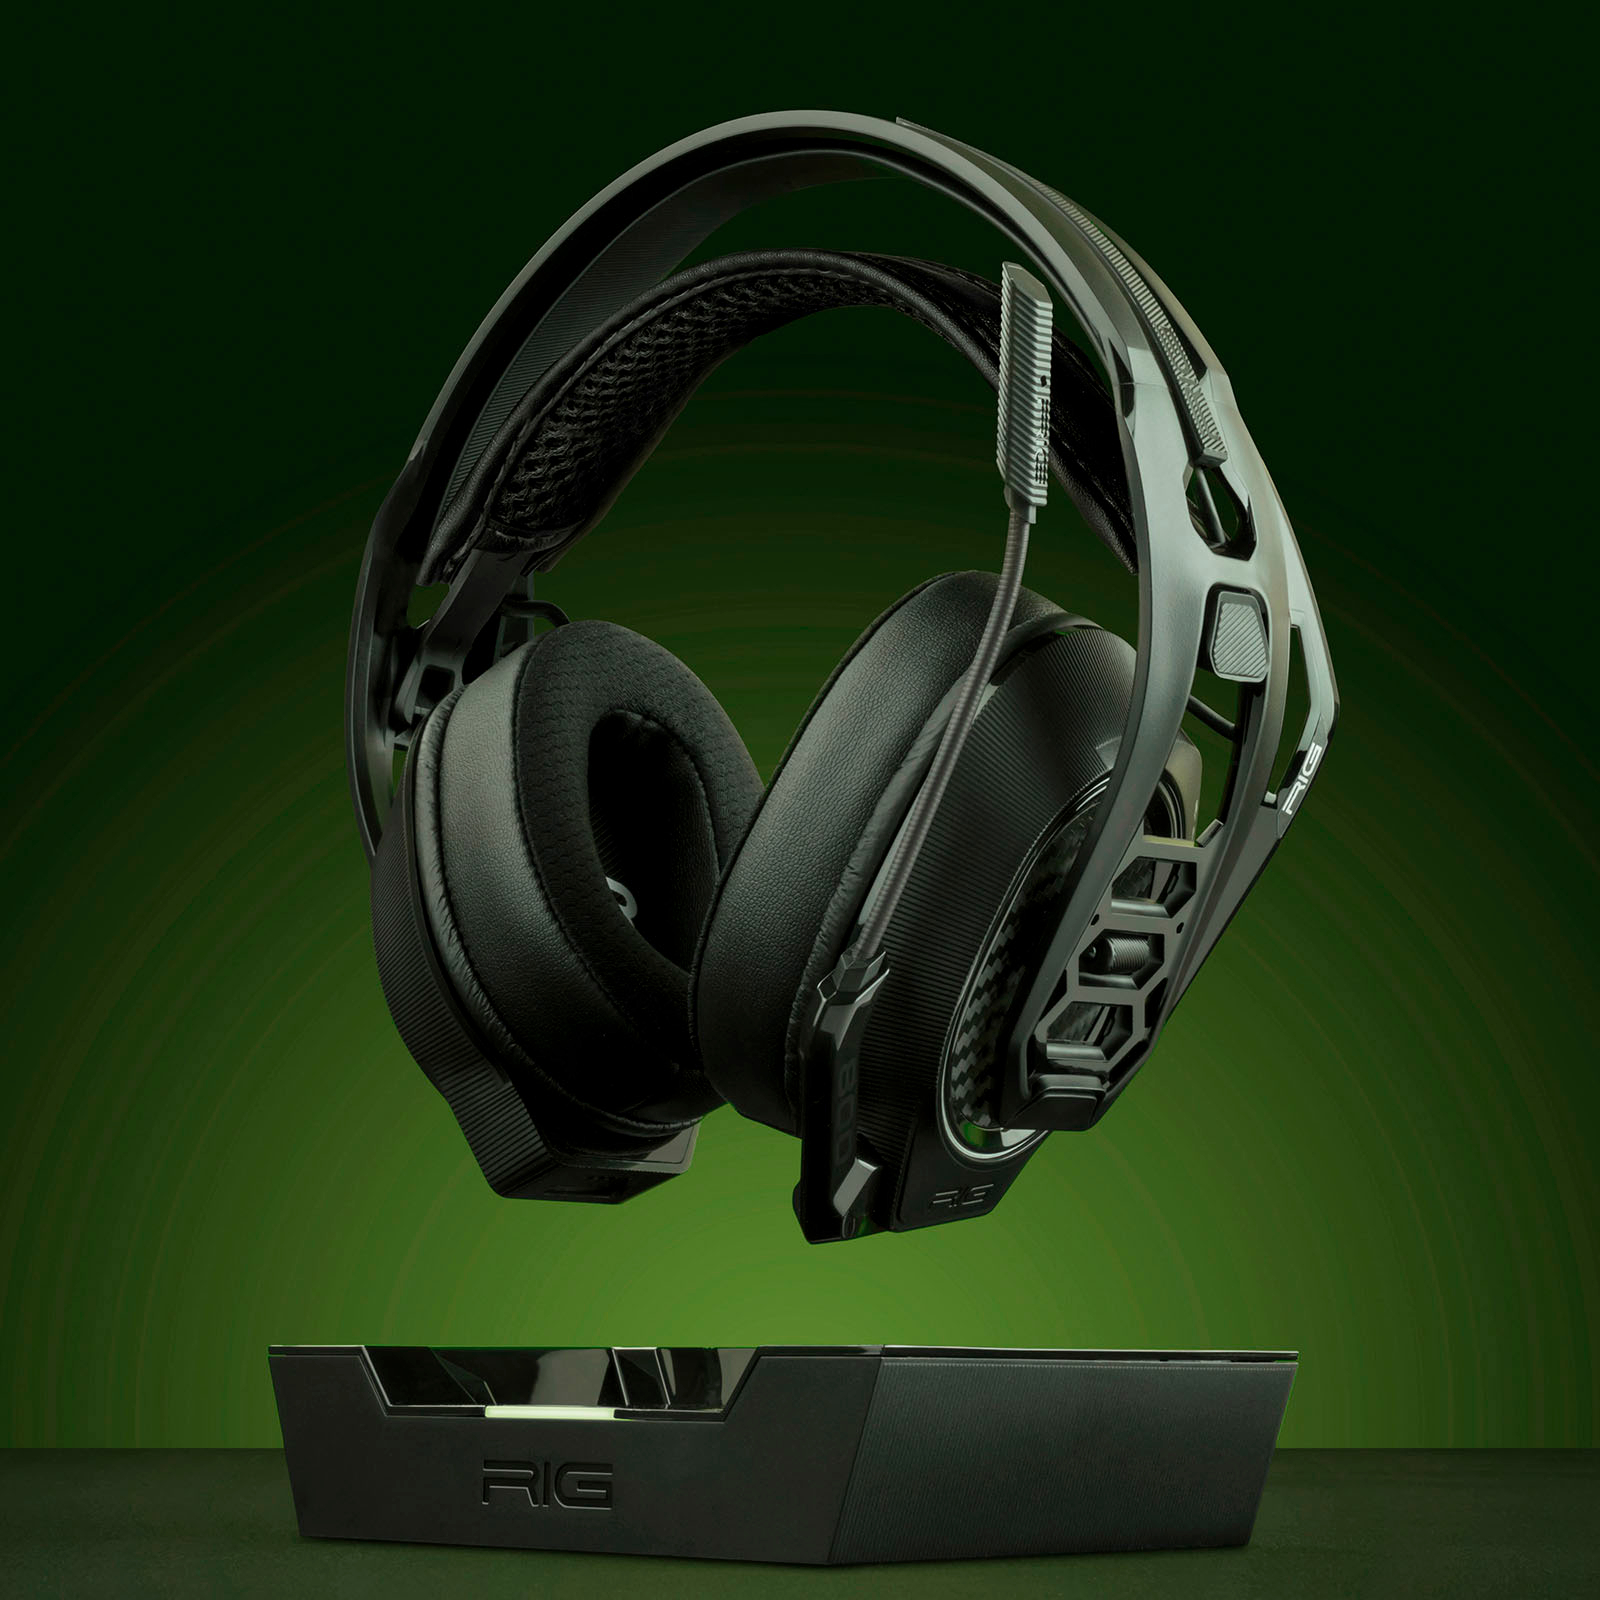 Pro Buy - Best for RIG Headset Xbox 800 10-1172-01 Black Gaming Wireless HX